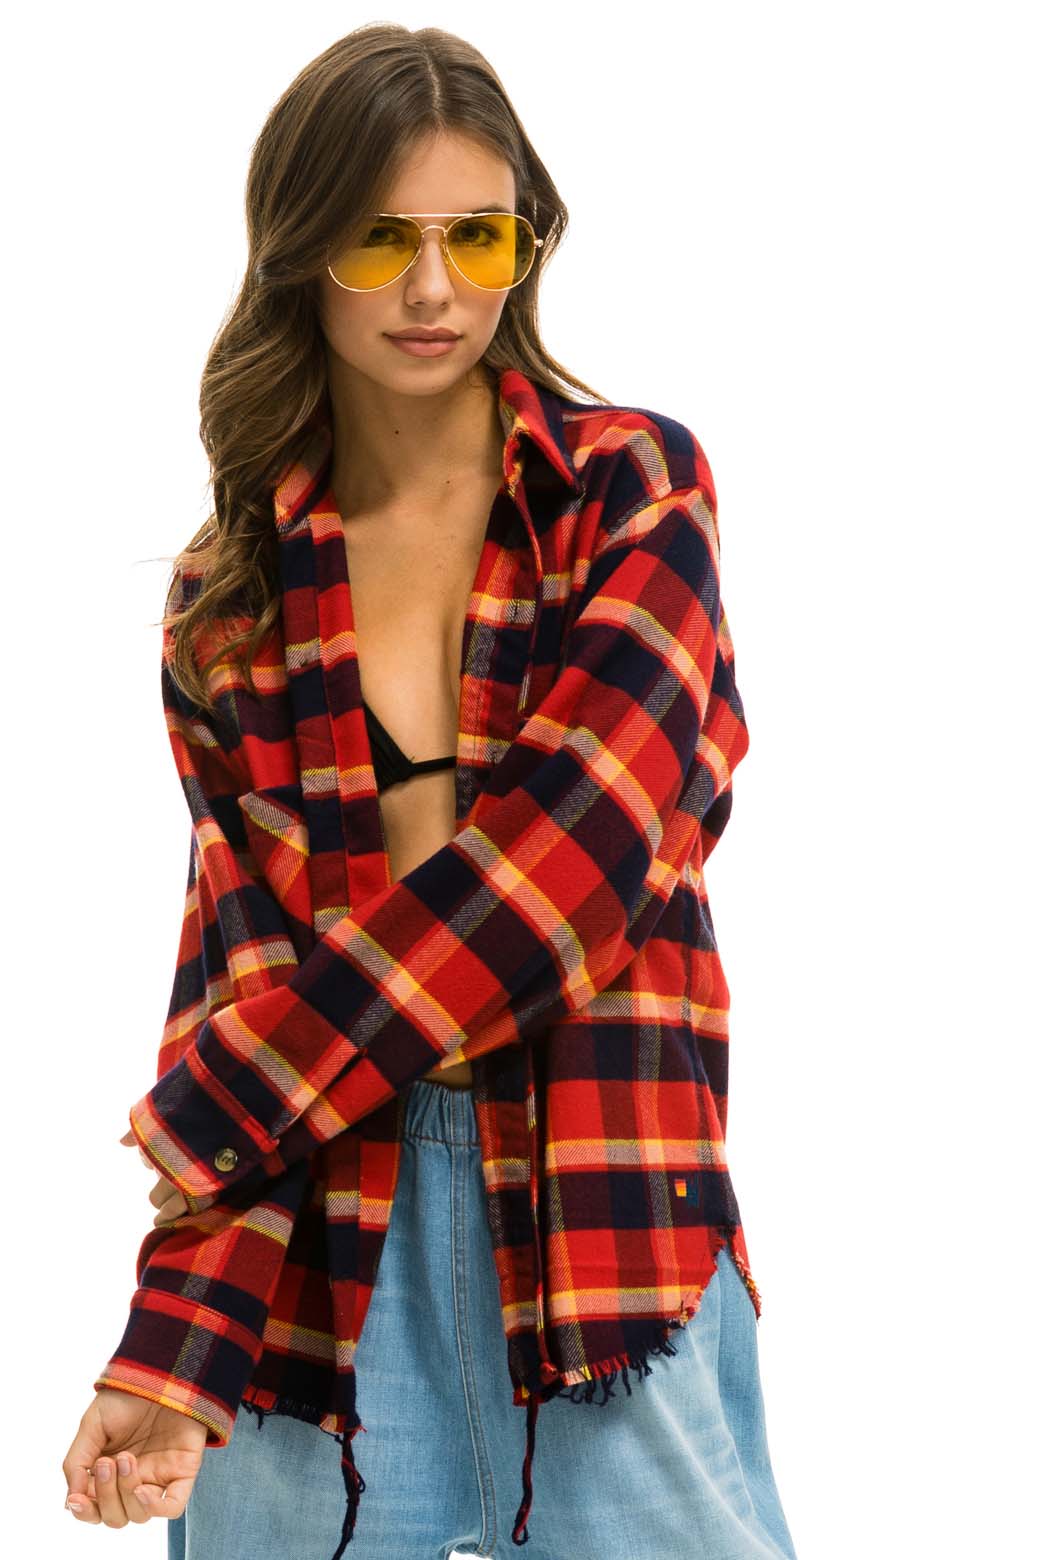 PLAID FLANNEL LIGHT WEIGHT UNISEX WESTERN SHIRT - RUGBY PLAID Flannel Aviator Nation 